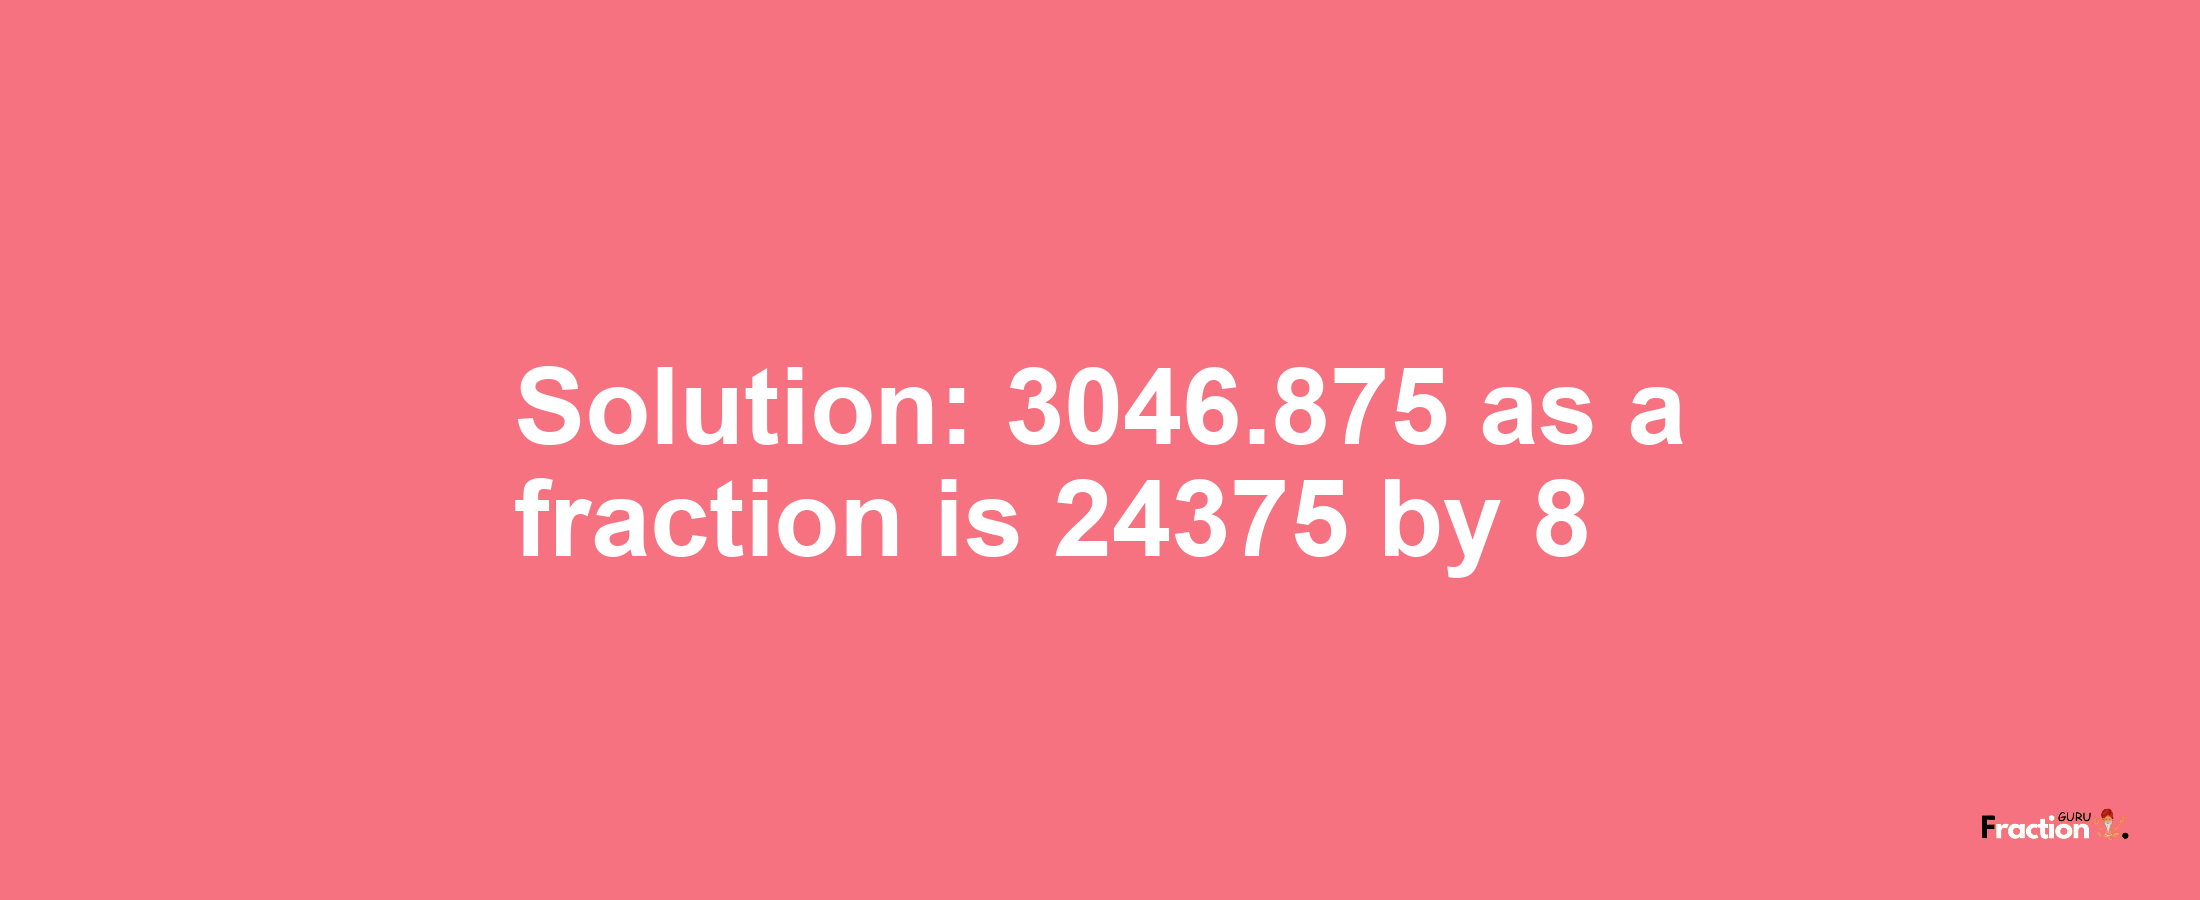 Solution:3046.875 as a fraction is 24375/8